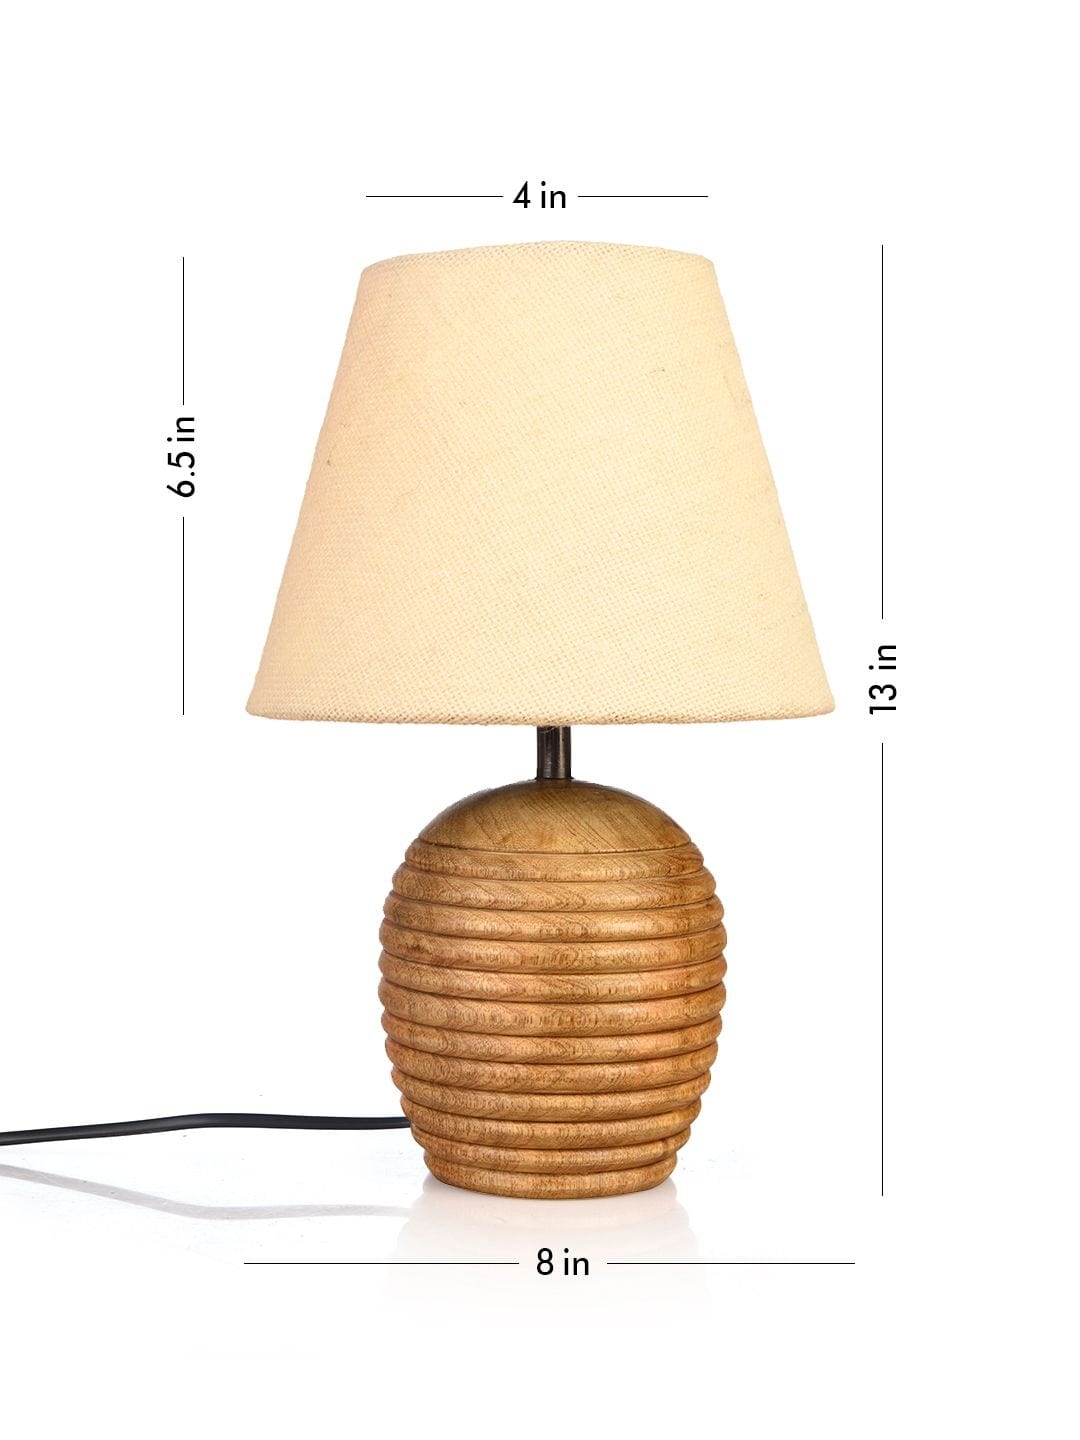 Striped Wooden Brown Lamp with White Jute Shade